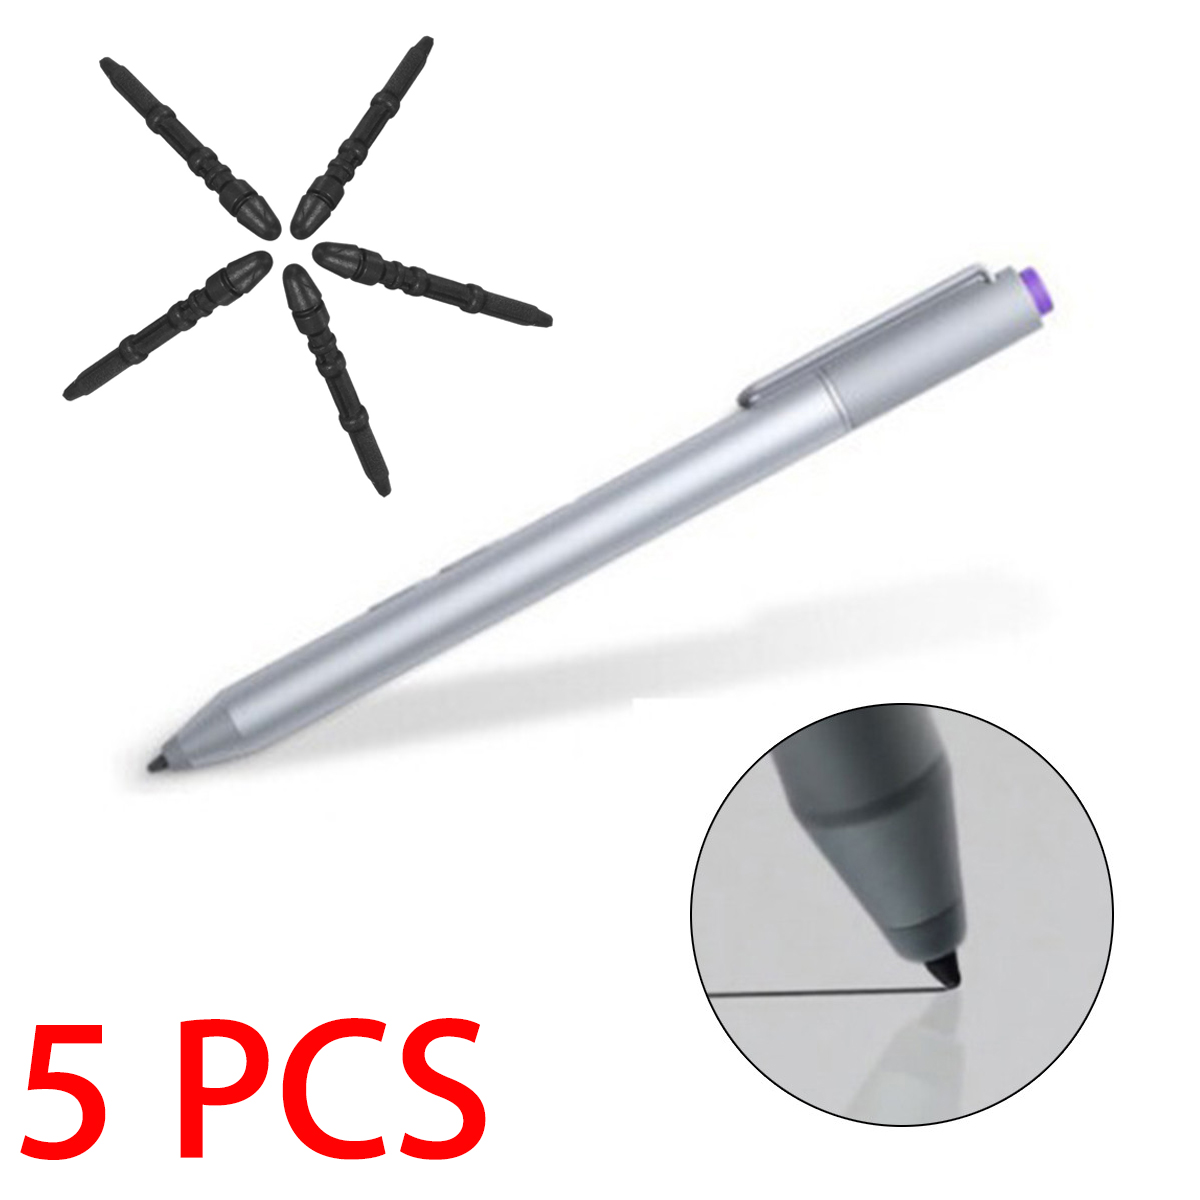 1pcs-Touch-Pen-Stylus-Tips-Refill-Replacement-for-Microsoft-Surface-Pro-3-1165677